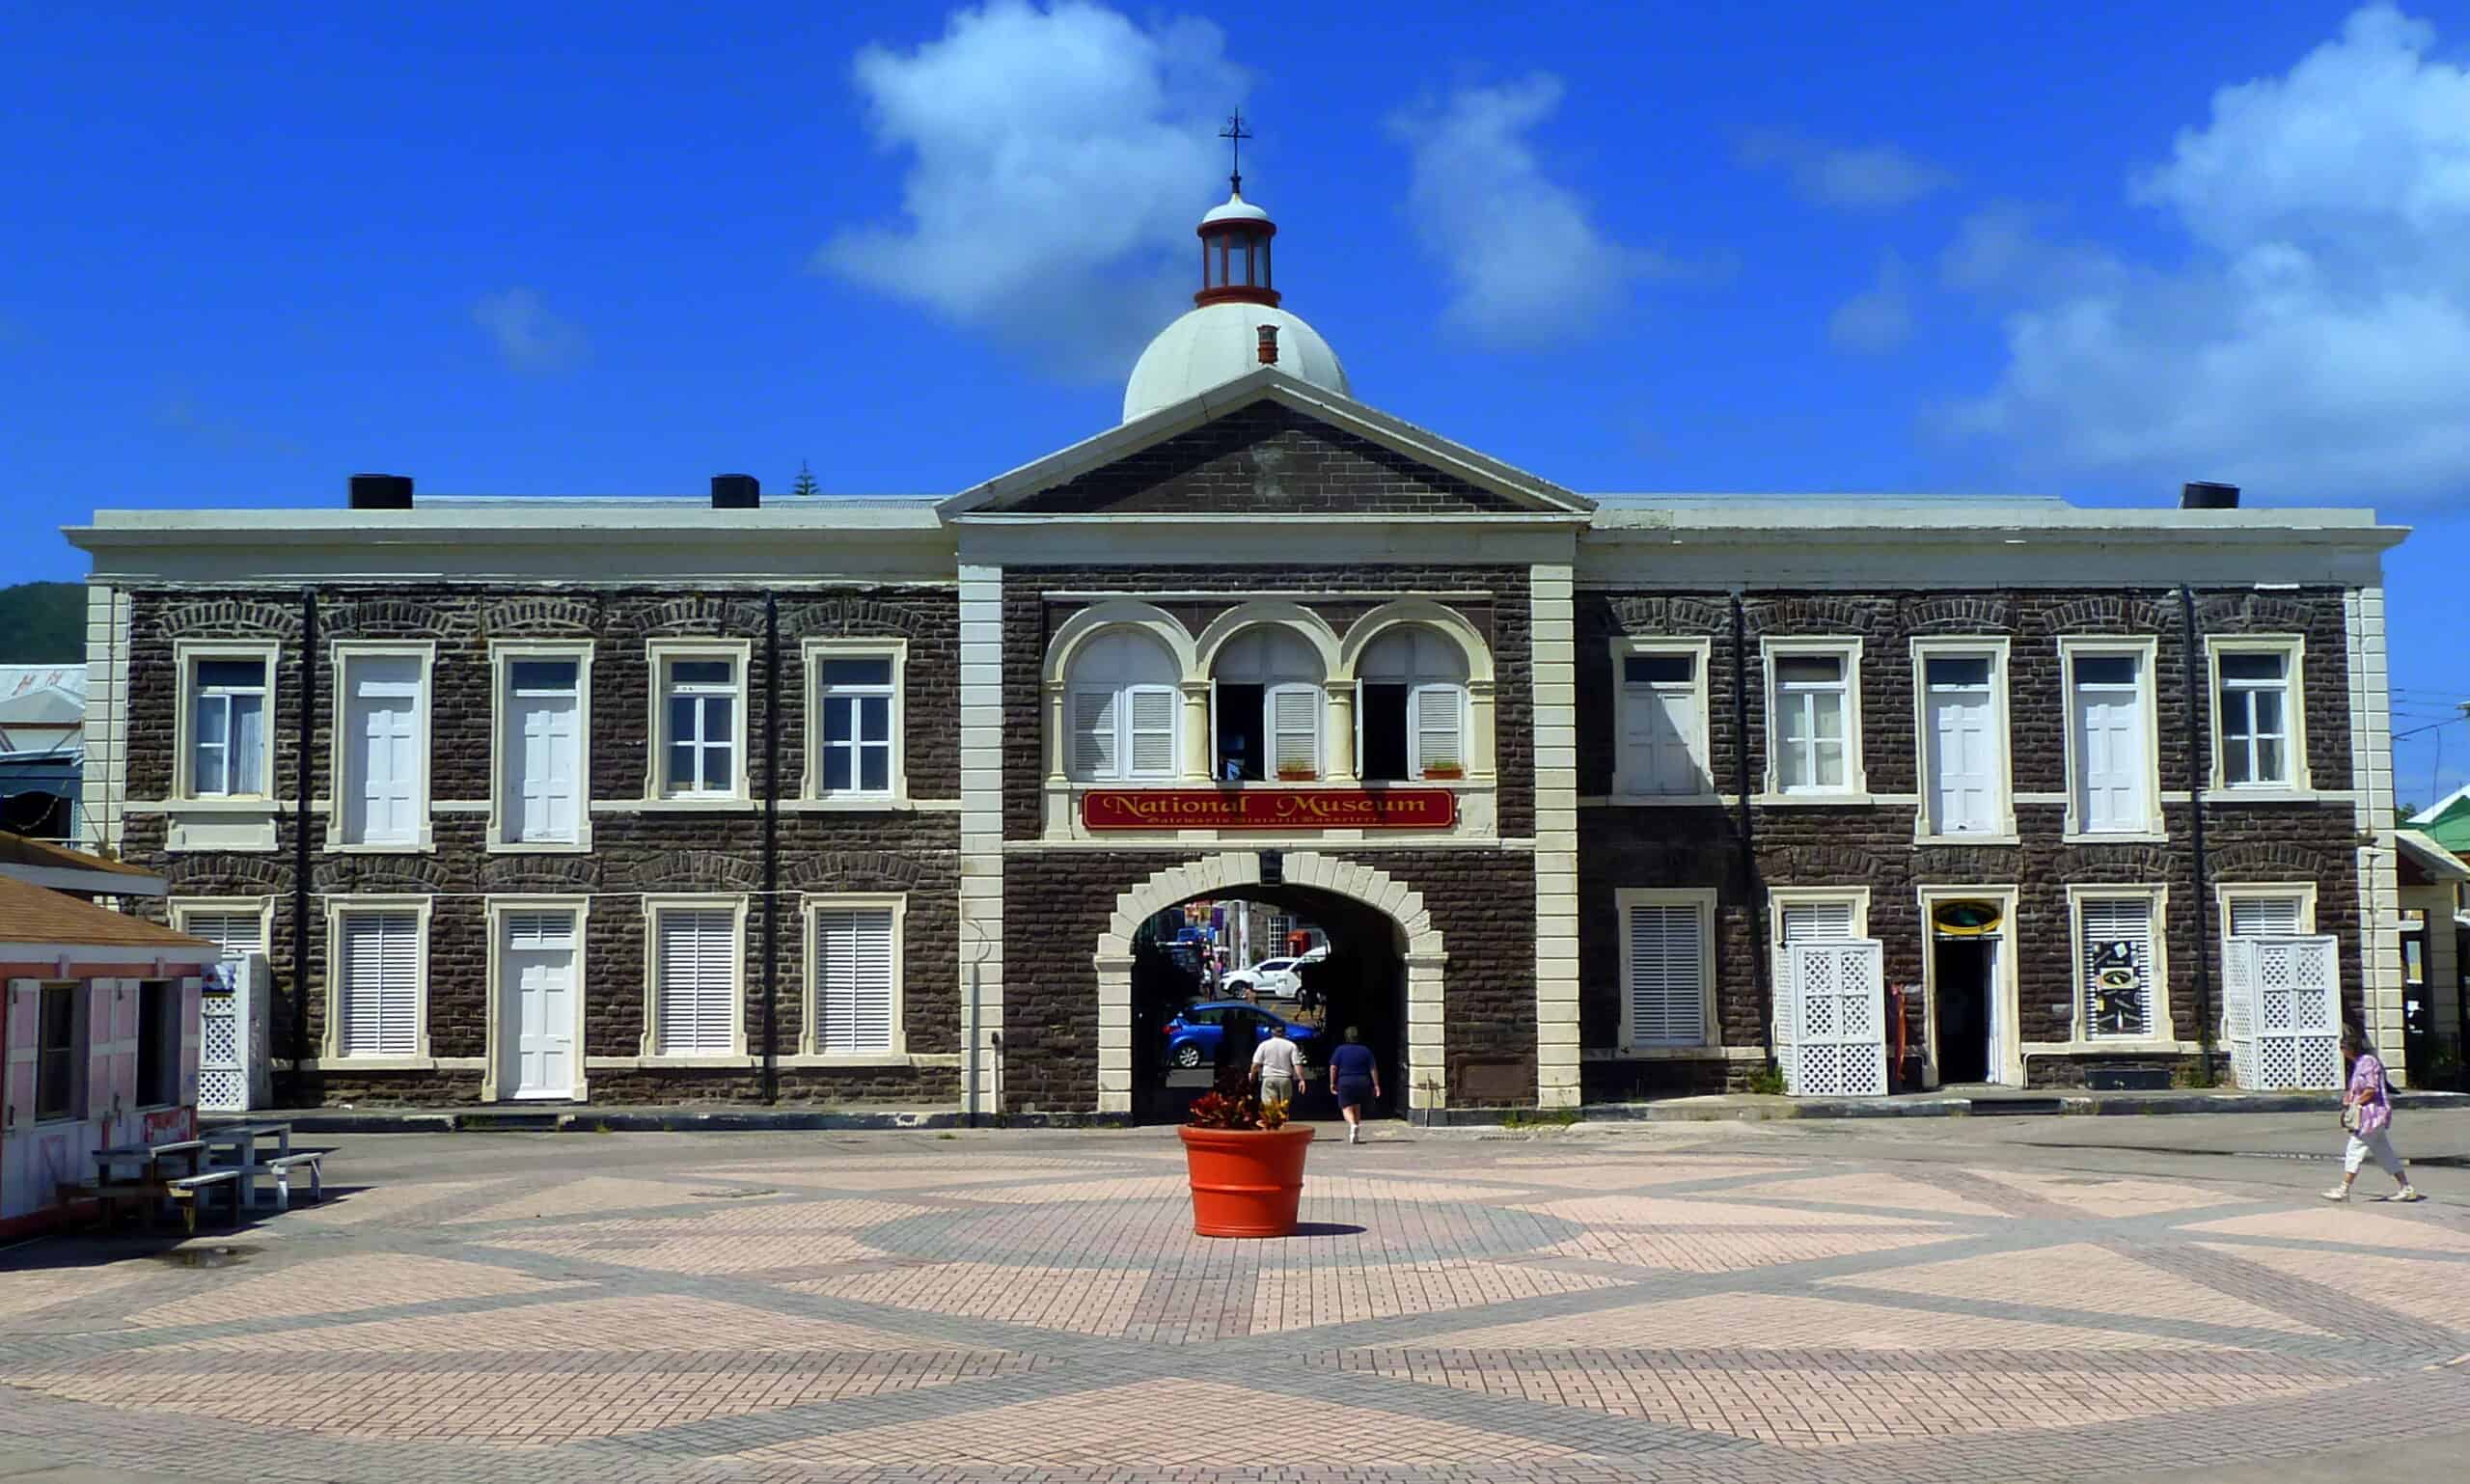 National museum of Saint Kitts and Nevis